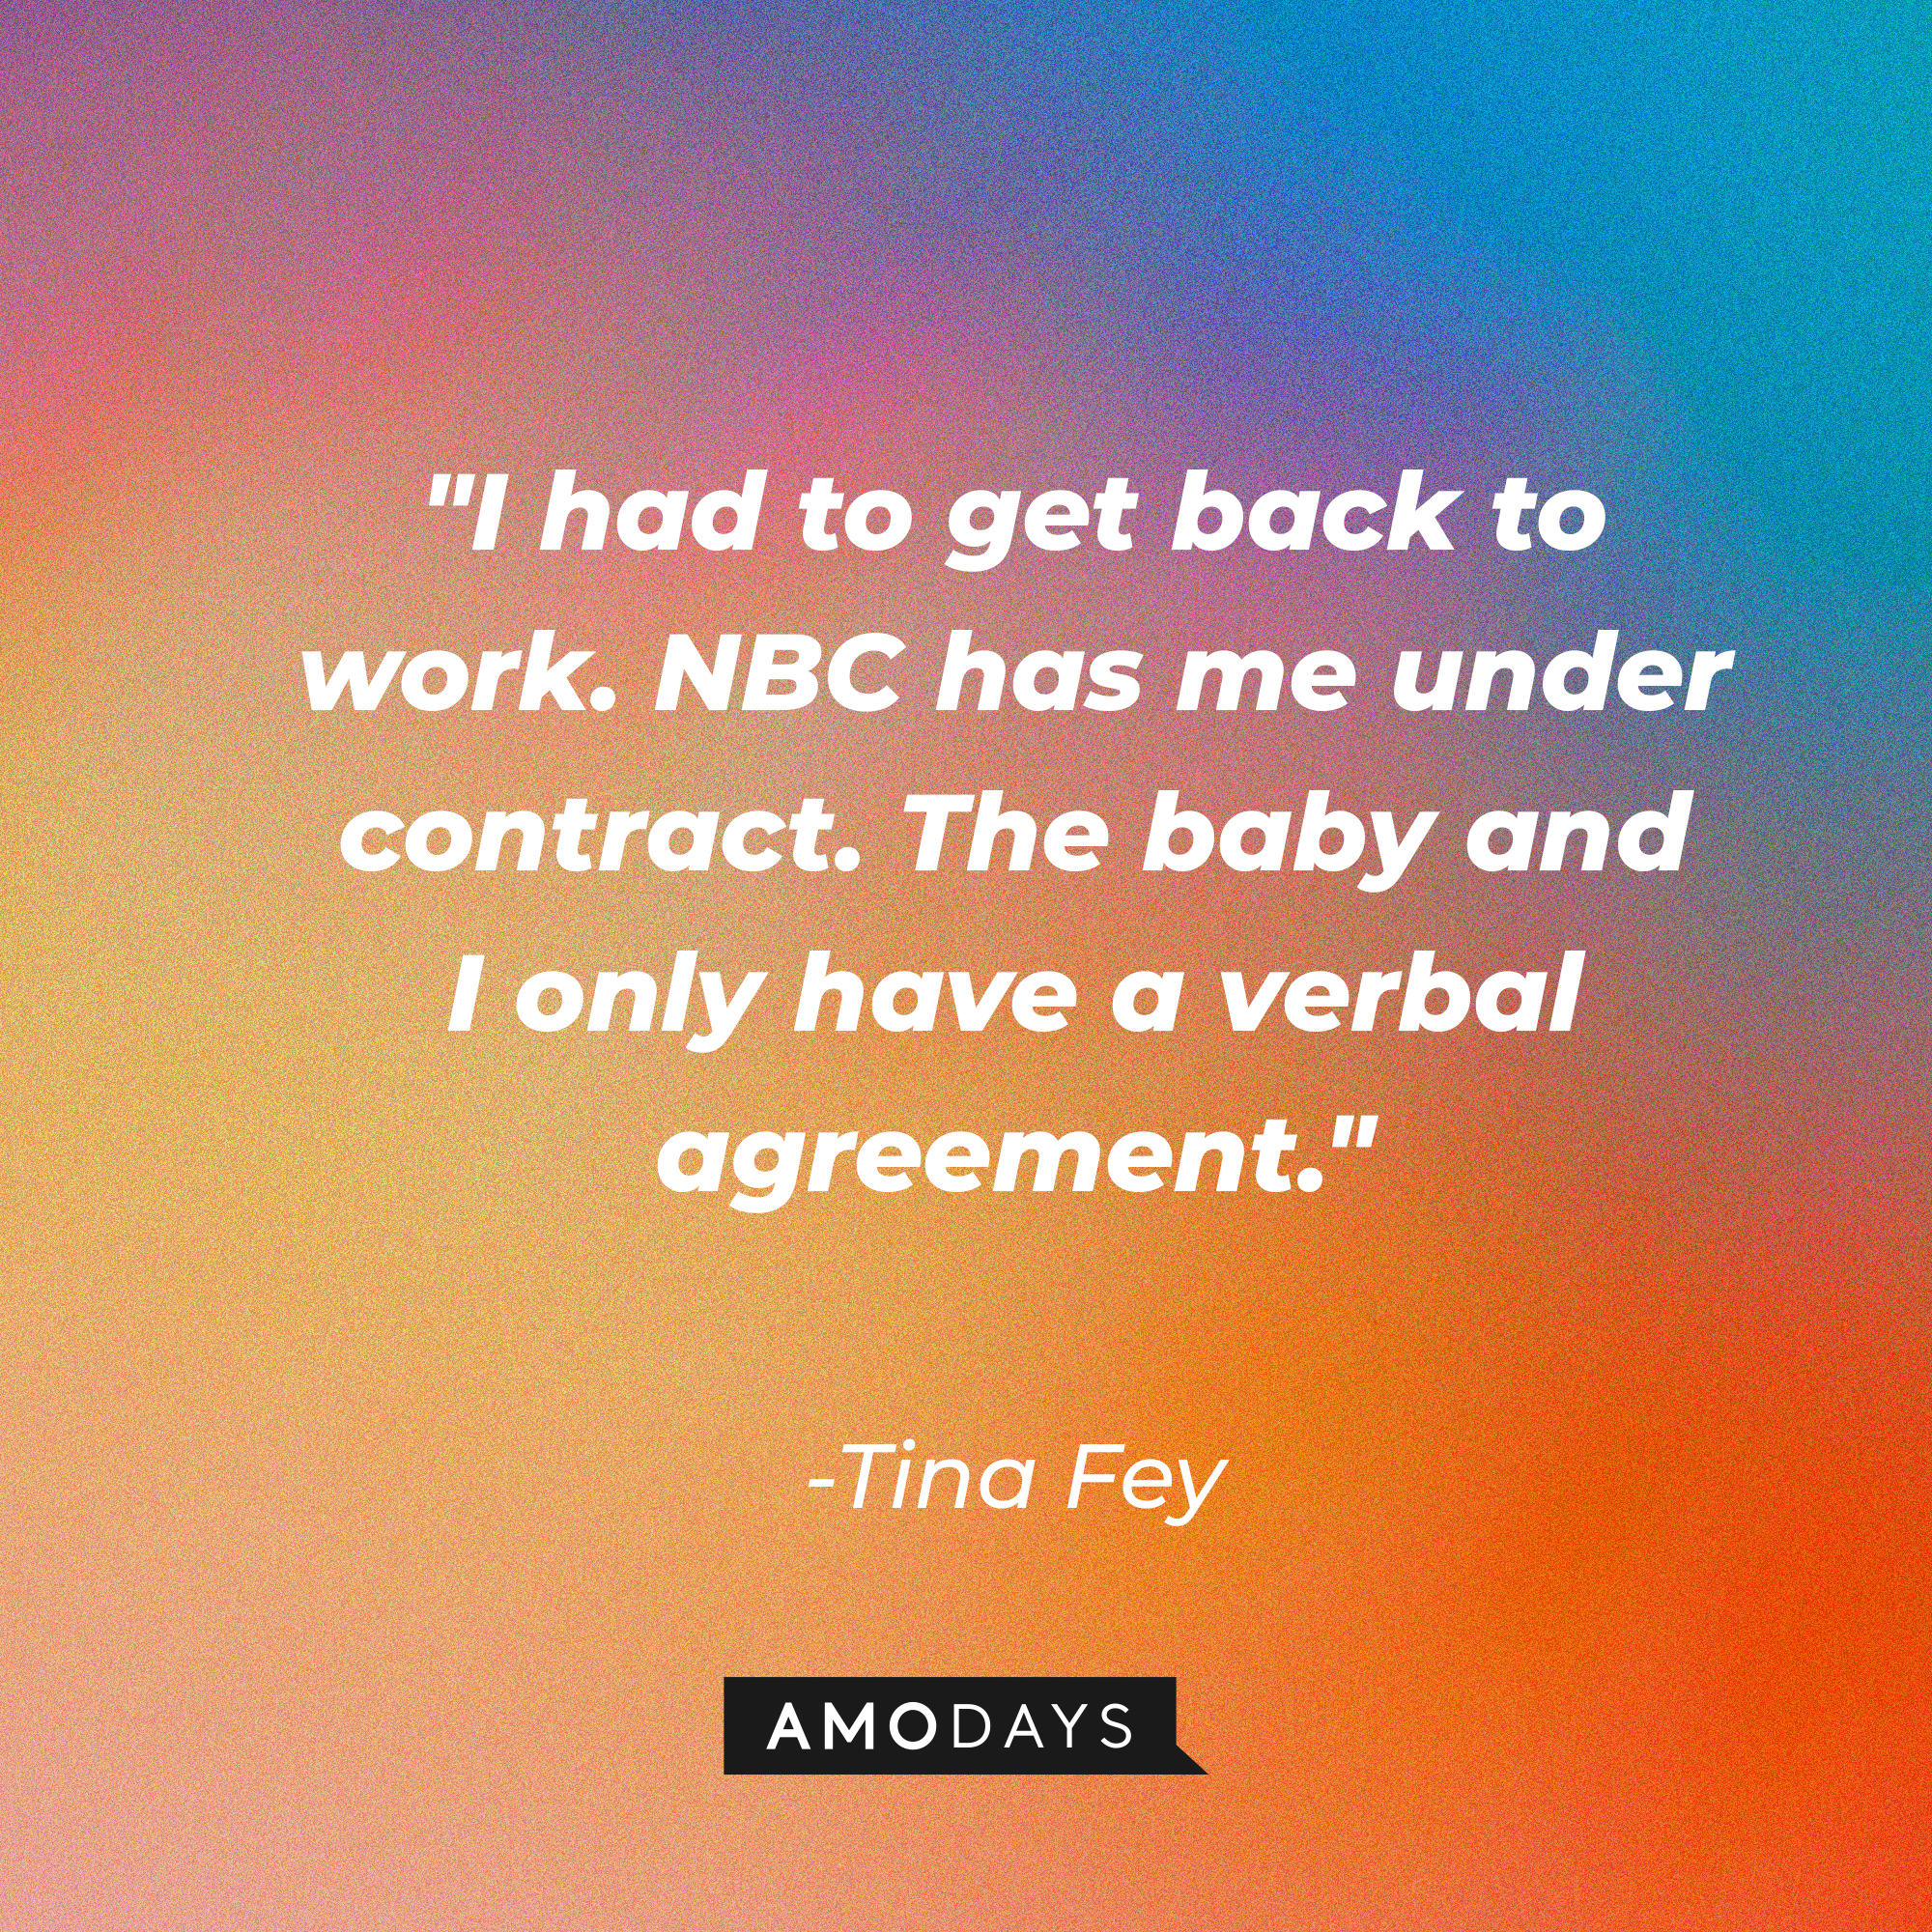 Tina Fey's quote: "I had to get back to work. NBC has me under contract. The baby and I only have a verbal agreement." | Source: AmoDays